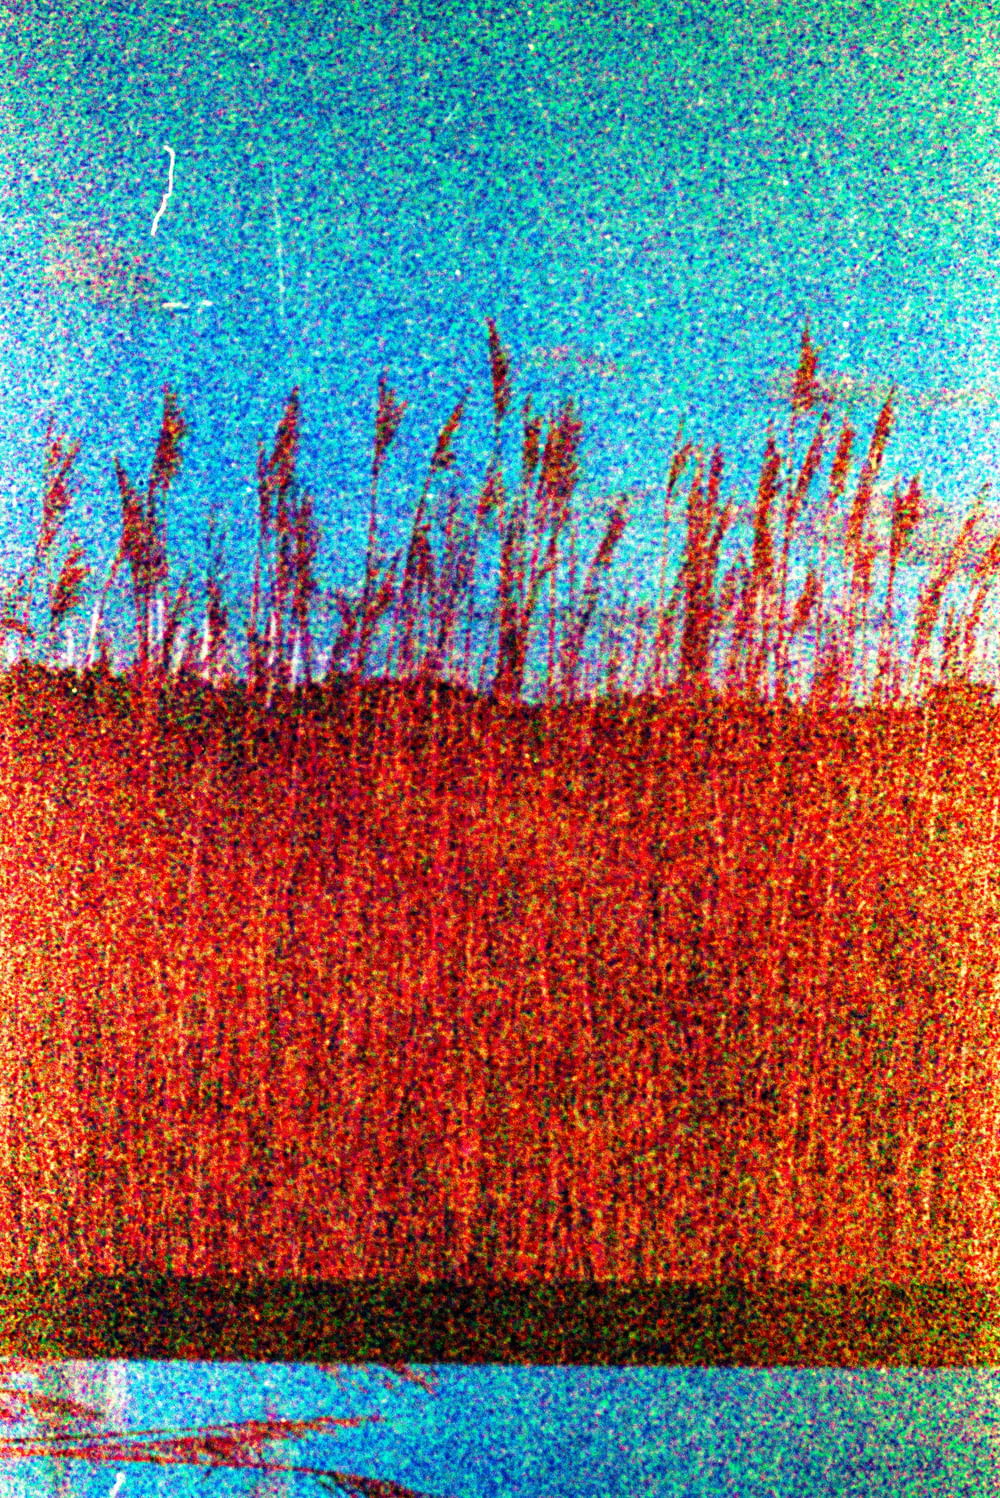 a painting of grass and water with a blue sky in the background